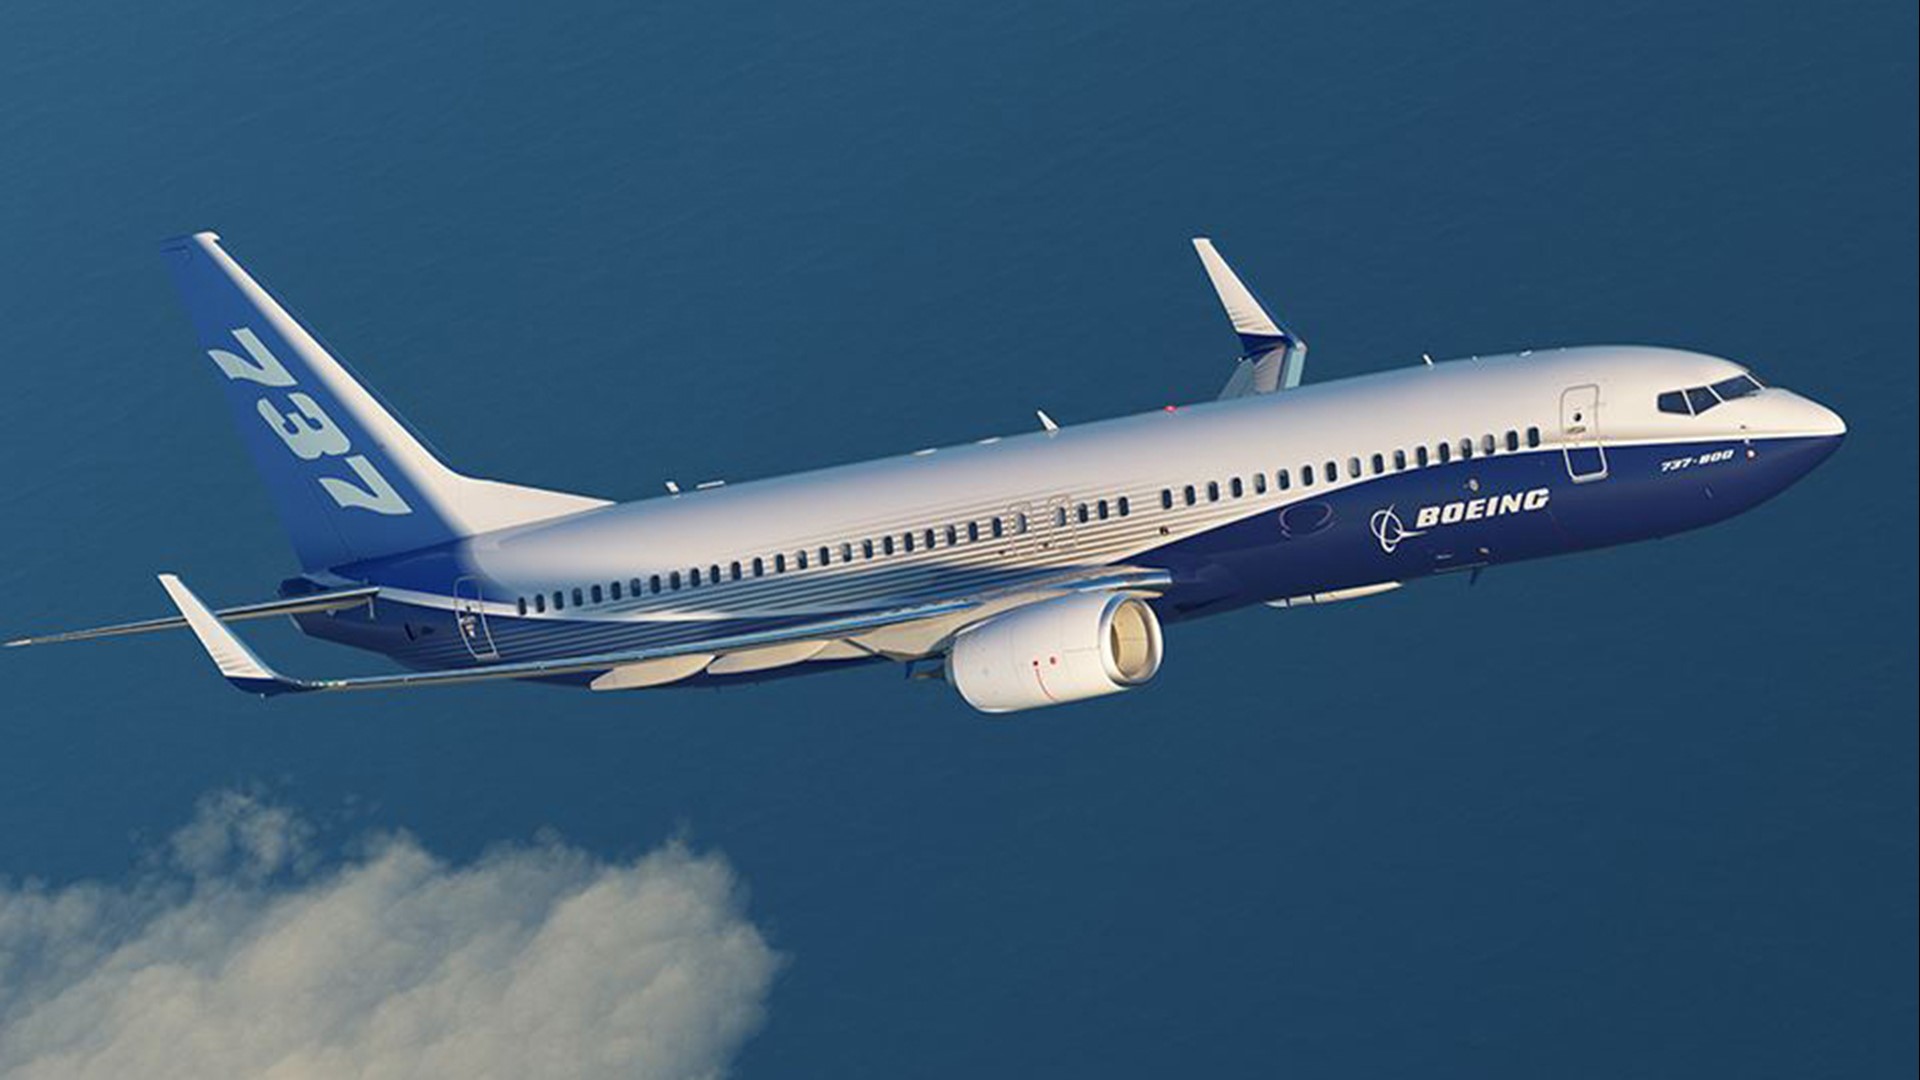 Boeing said it found cracking issues in a small number of older 737 Next Generation jets involving the wings.